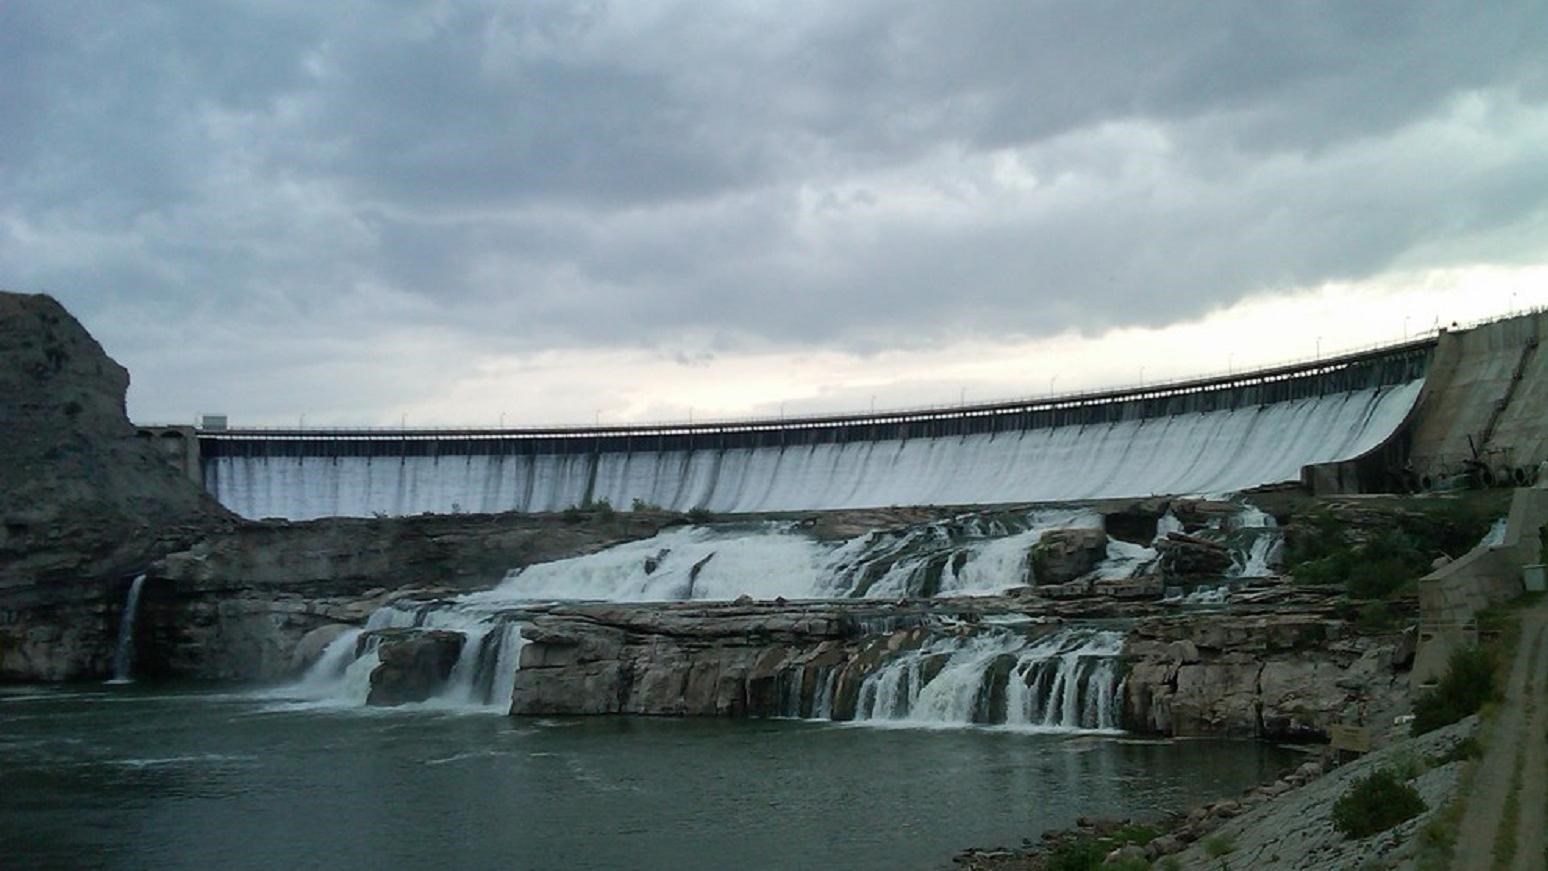 Water cascades down the wall of a dam and a rocky shelf